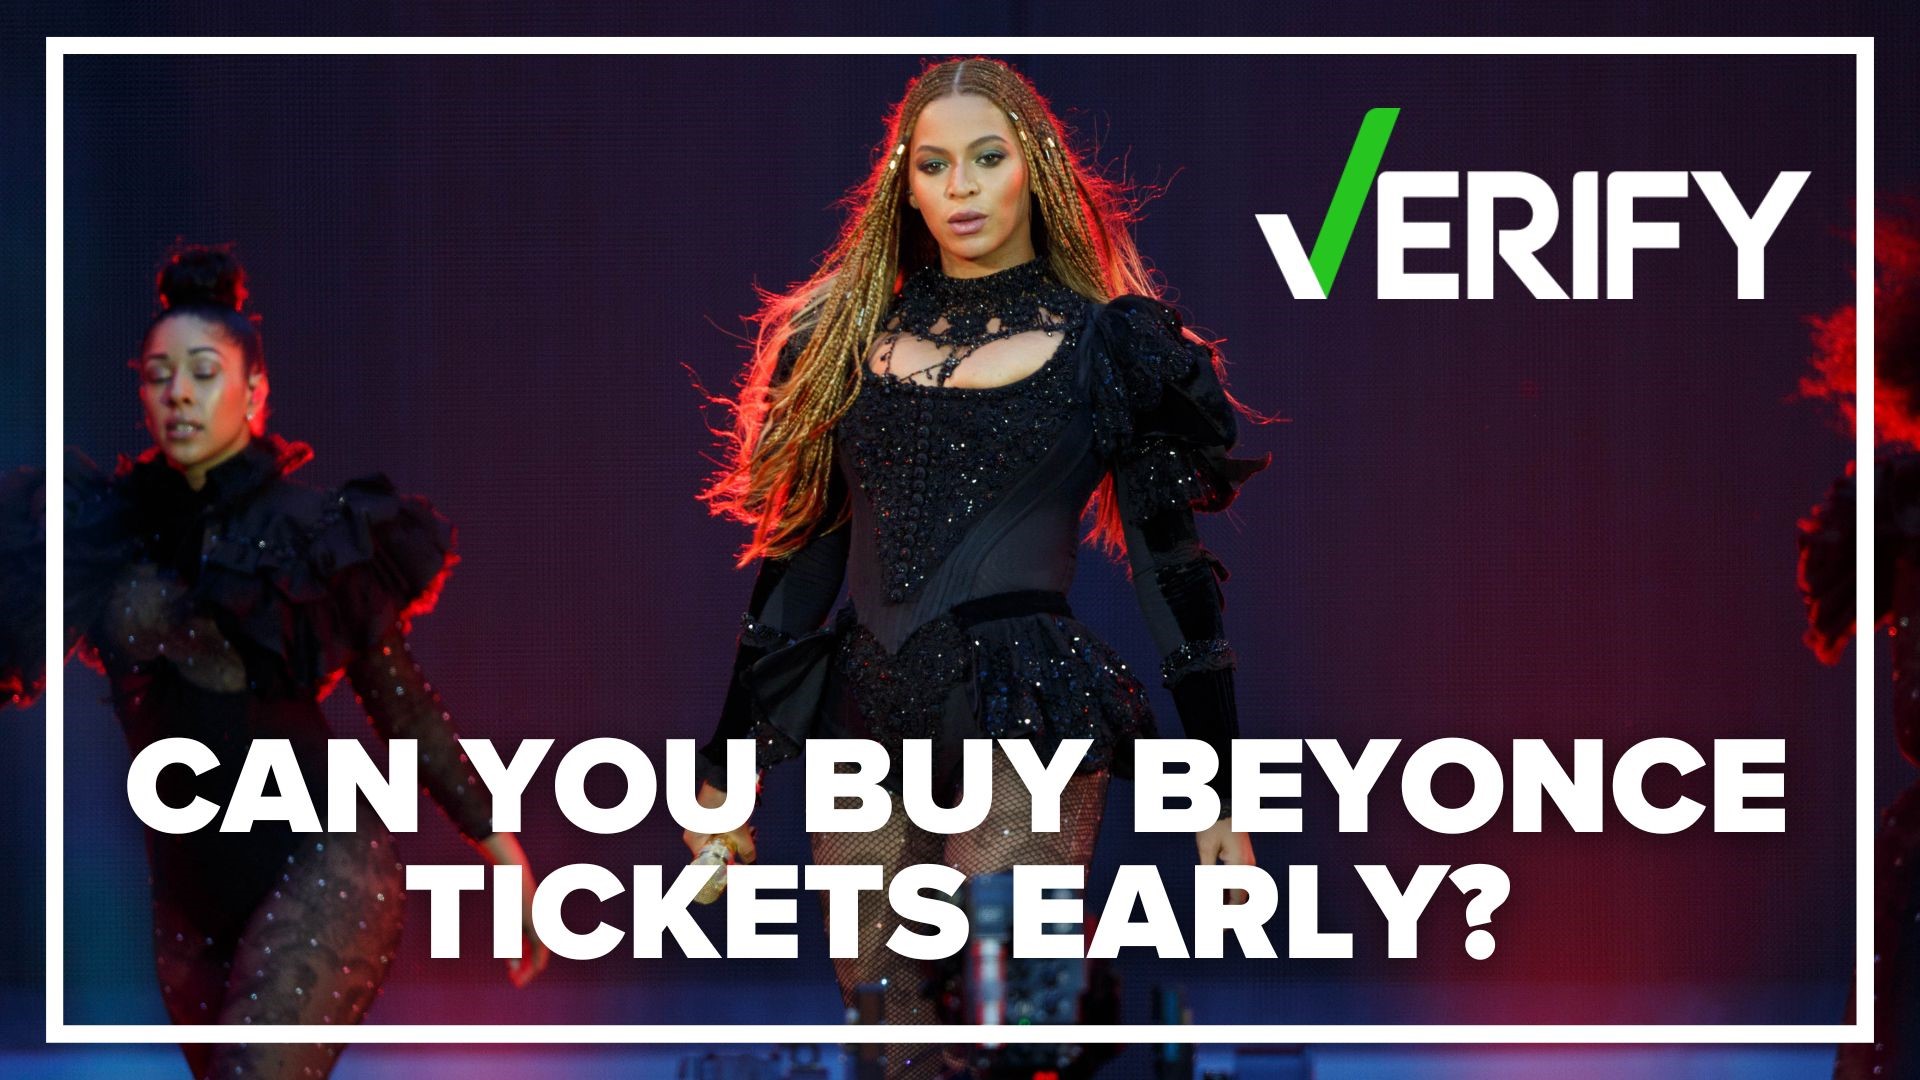 General admission tickets for Beyonce´'s Charlotte concert don't go on sale until later this month, so why are tickets already posted on secondary ticket markets?